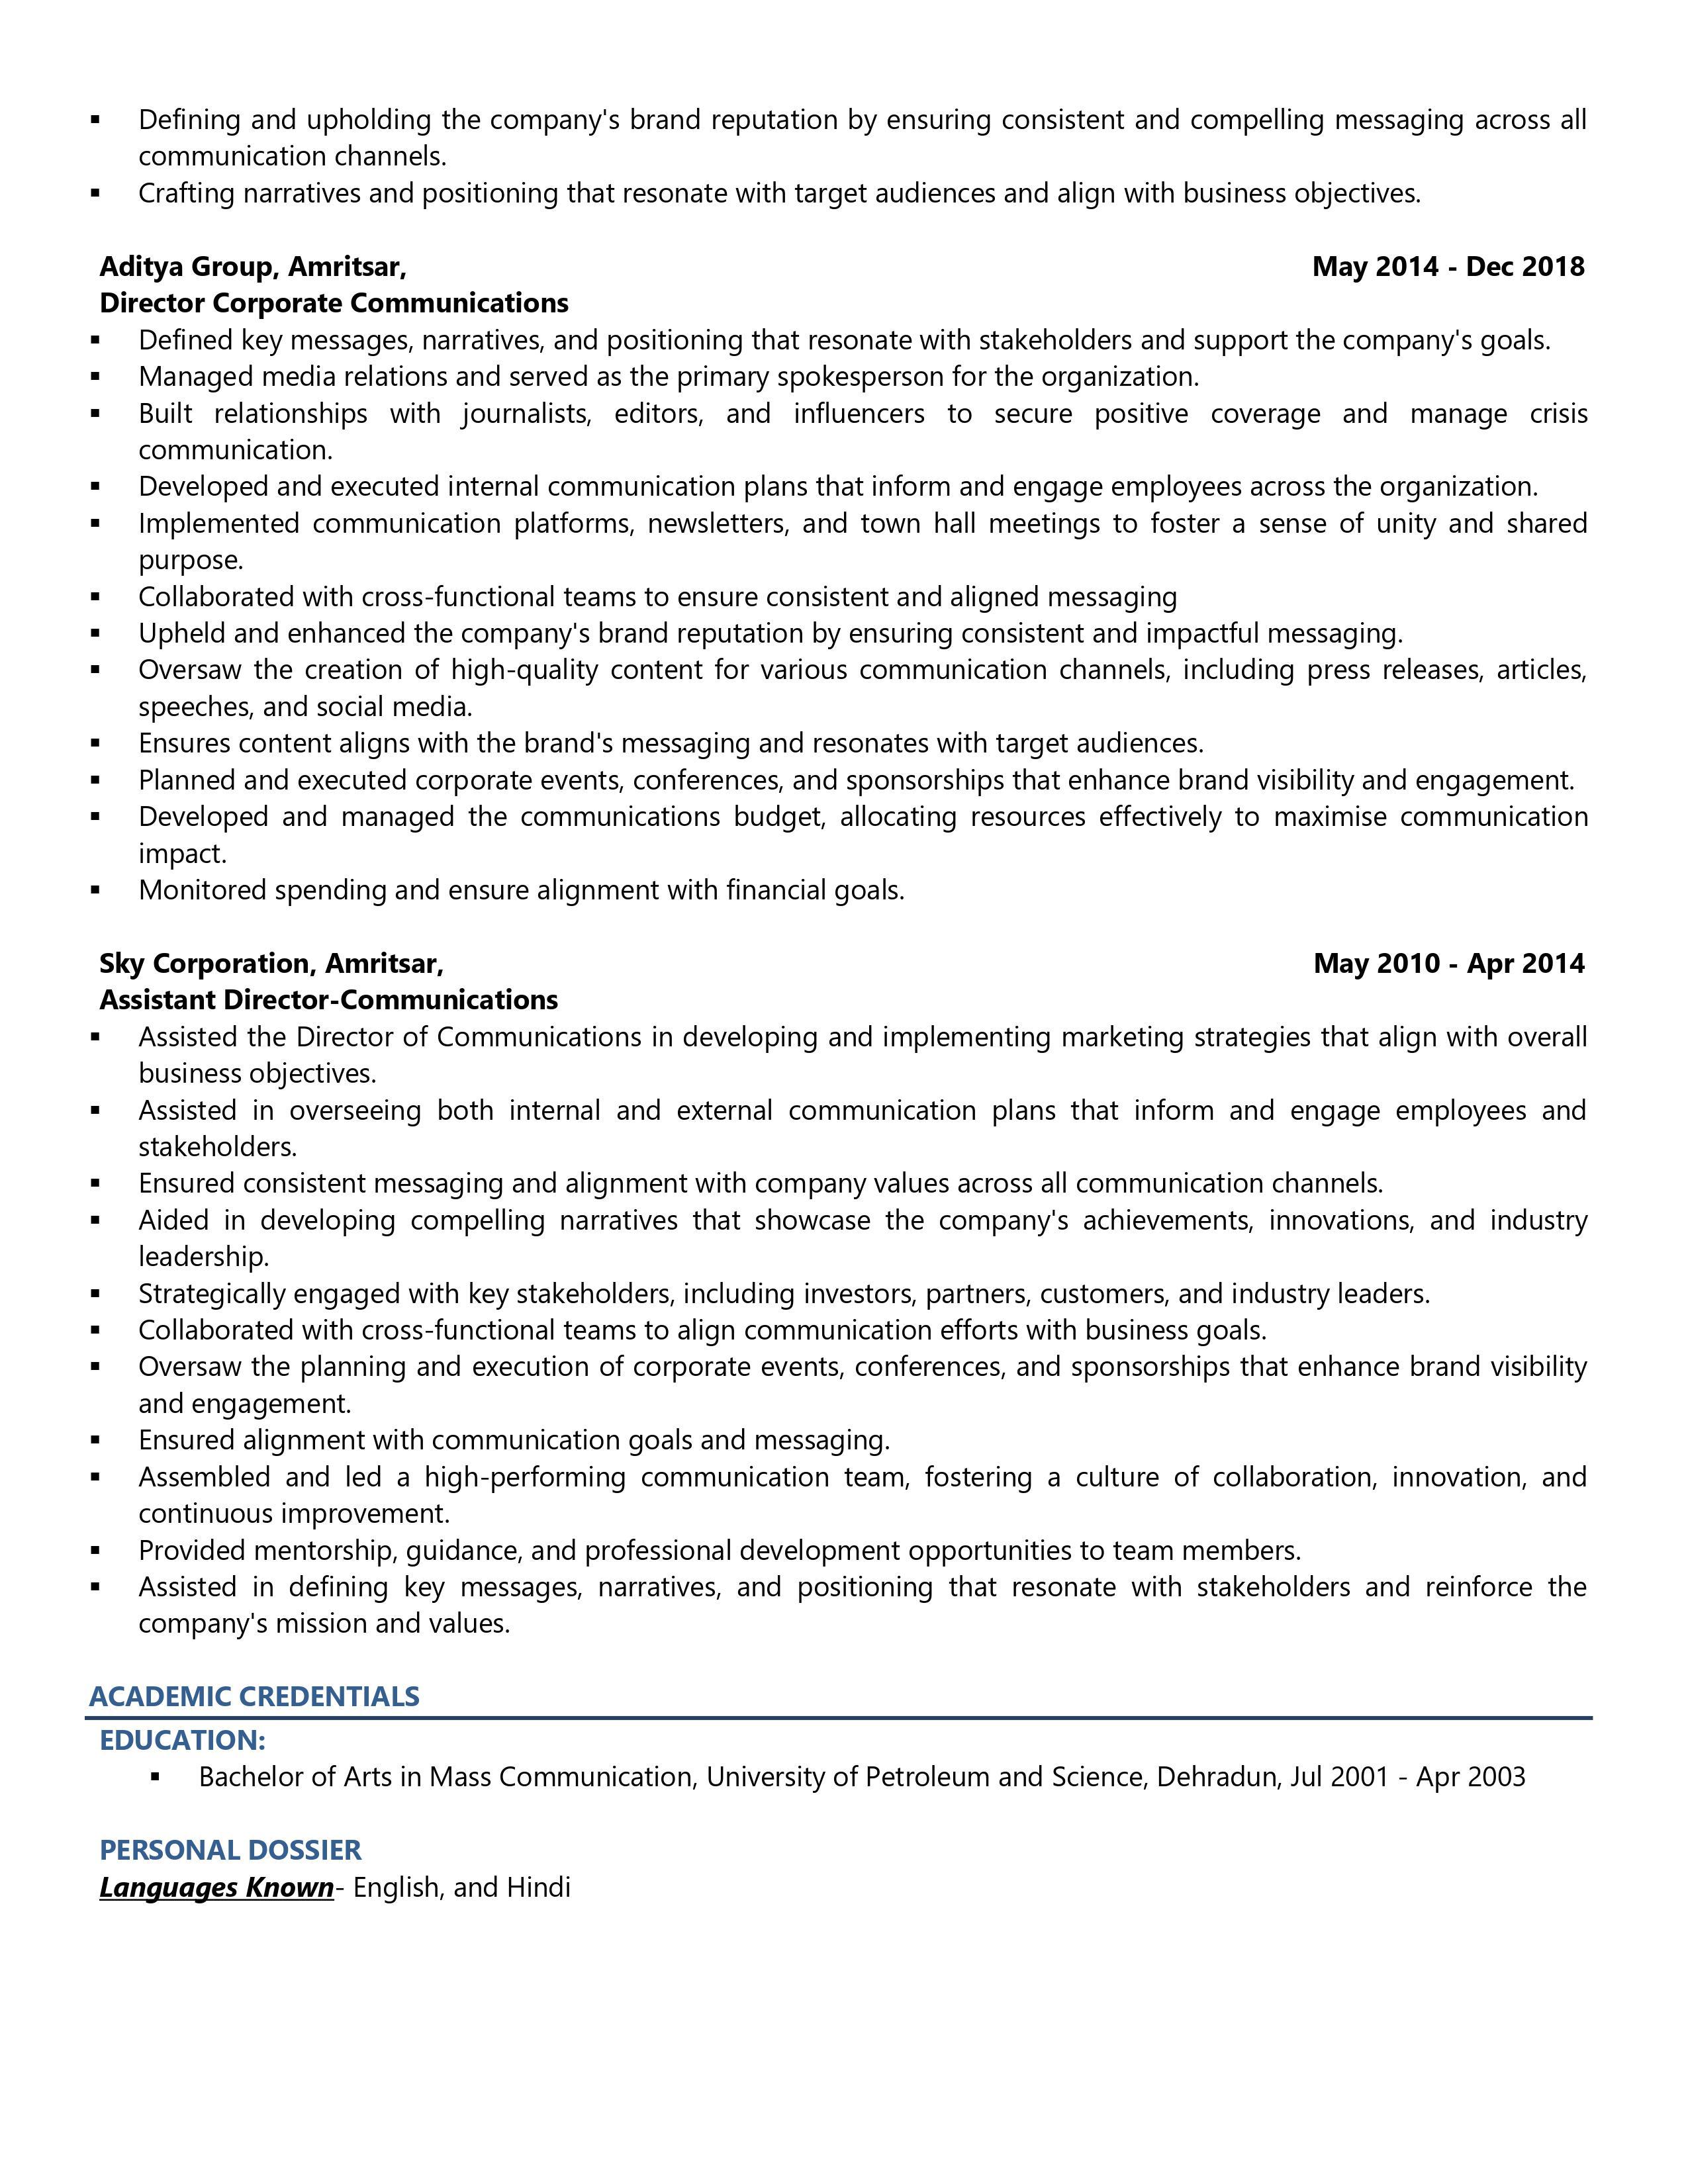 Chief Communication Officer - Resume Example & Template